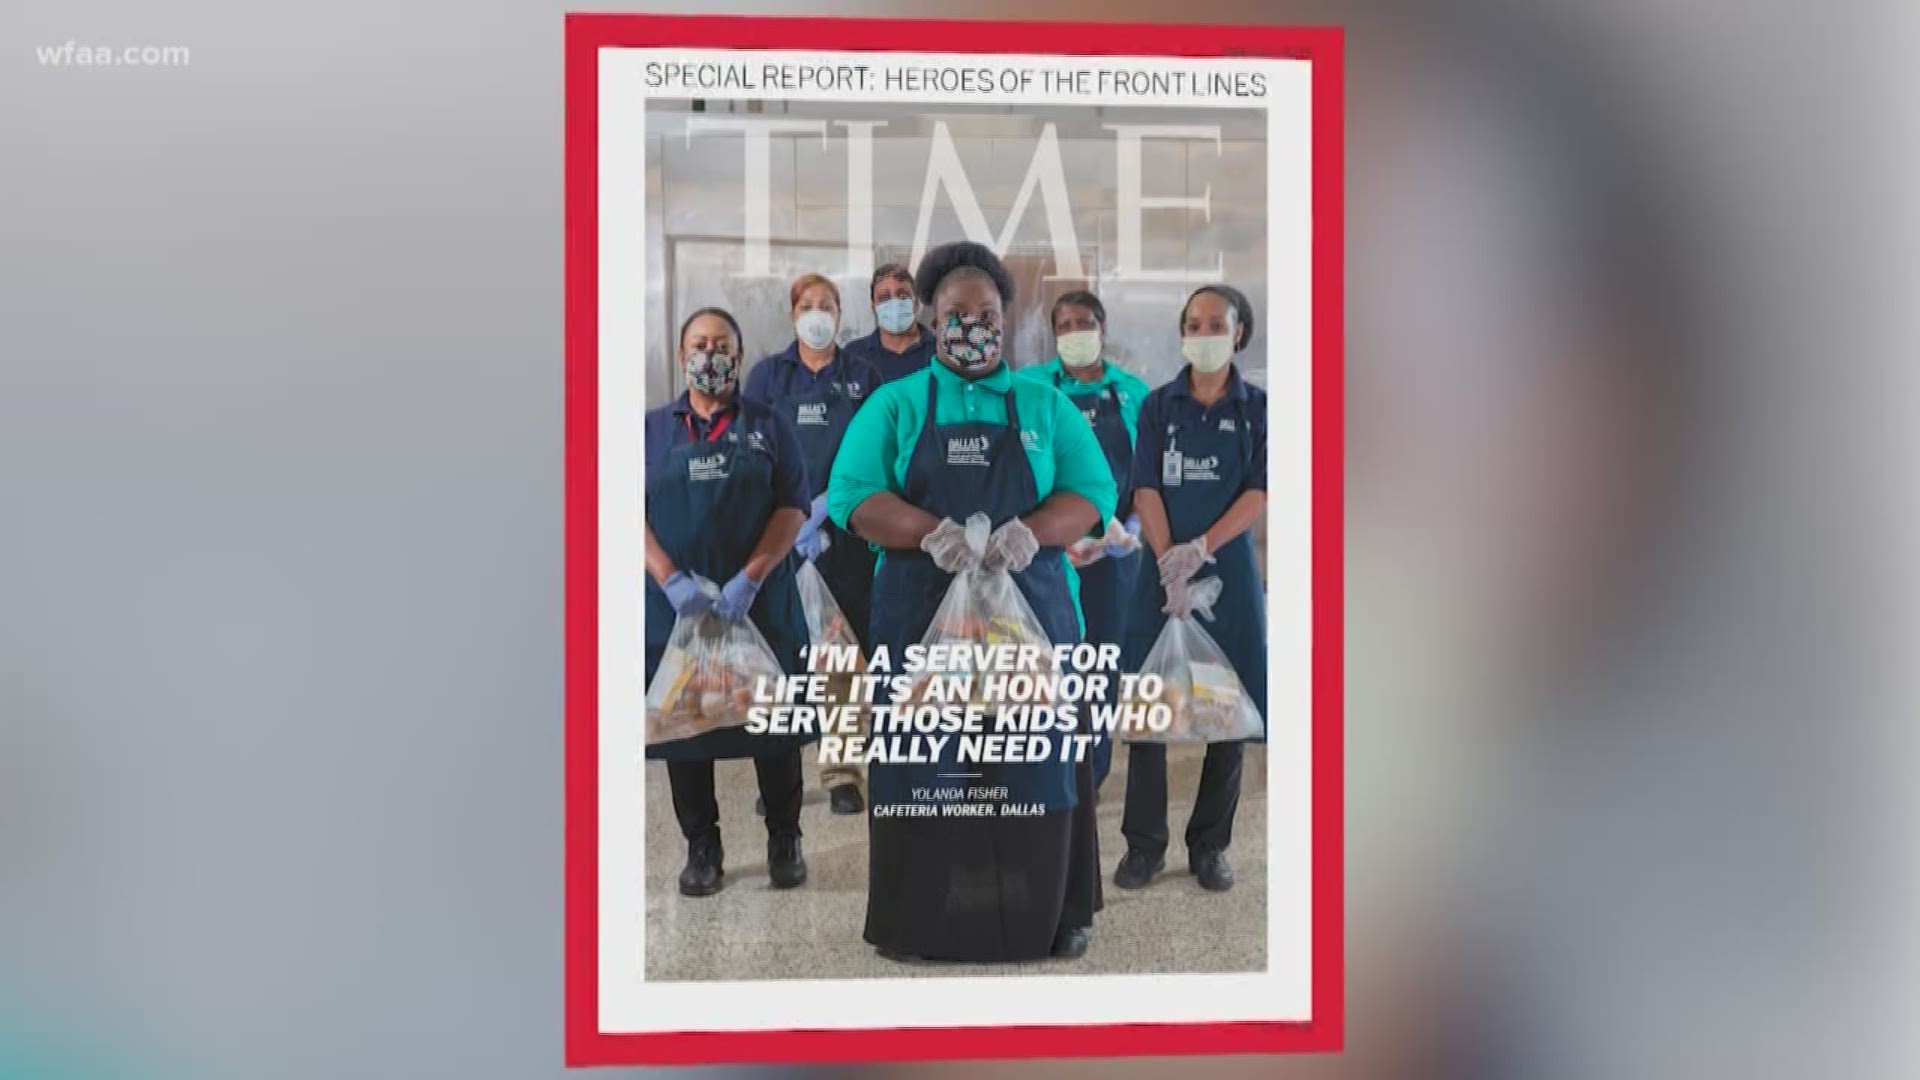 Dallas ISD workers have give out more than a million meals since schools closed on March 23, 2020.